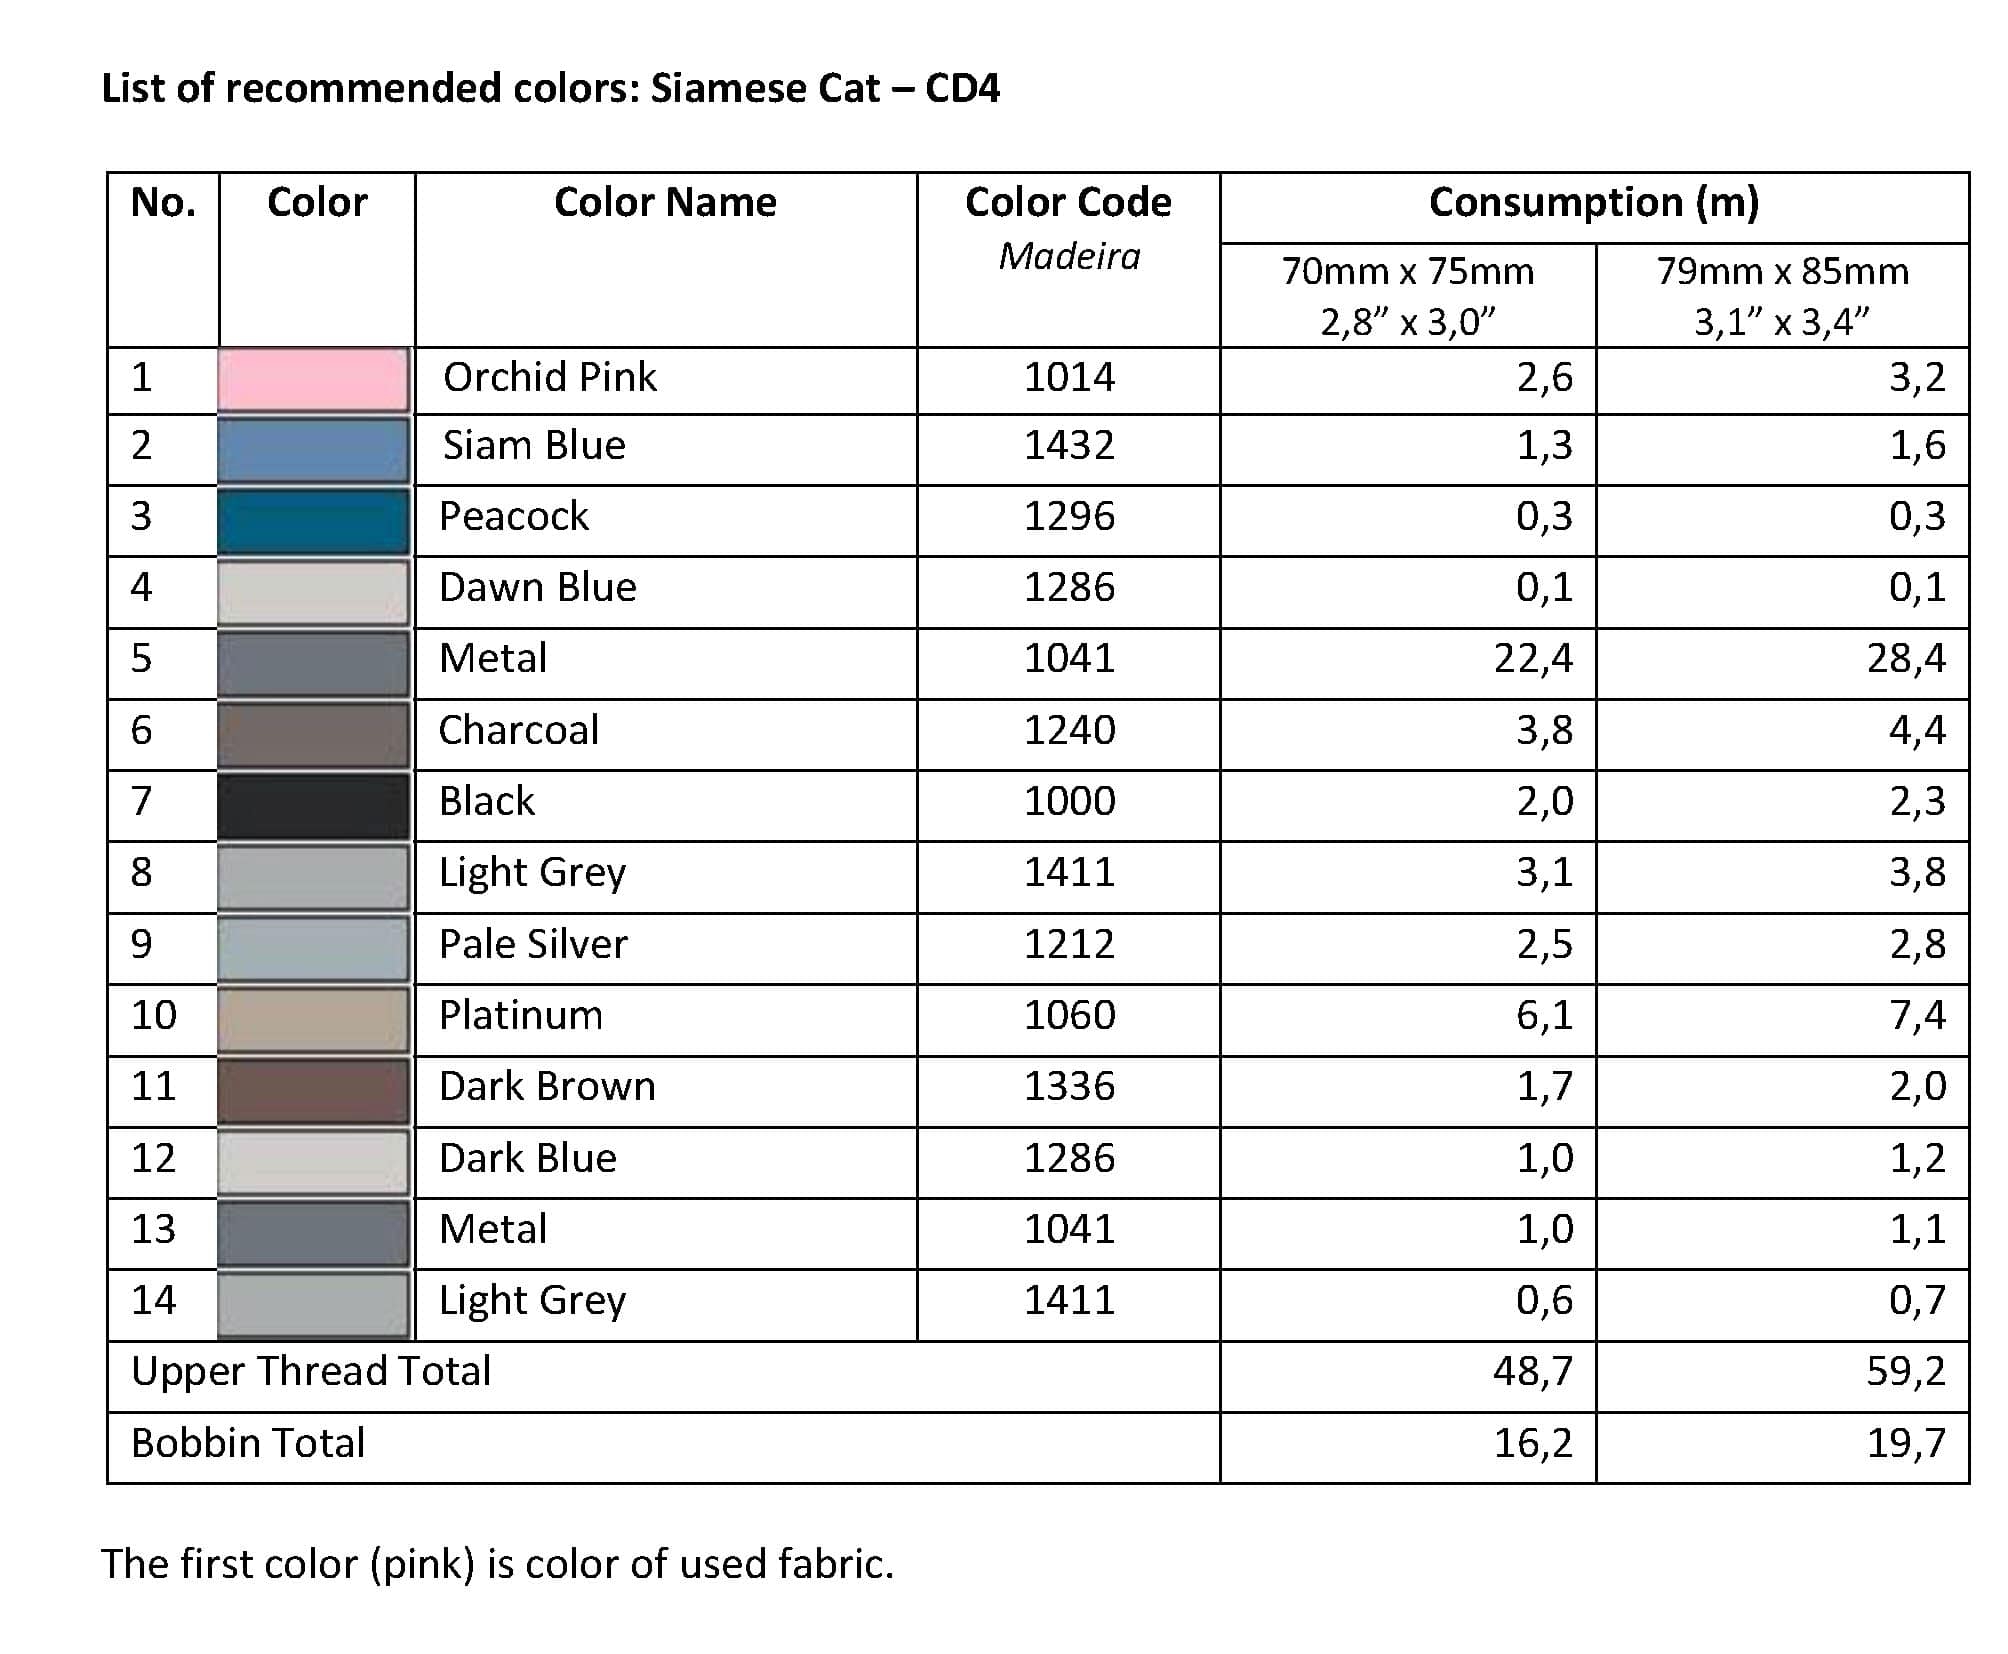 List of Recommended Colors - Siamese Cat CD4